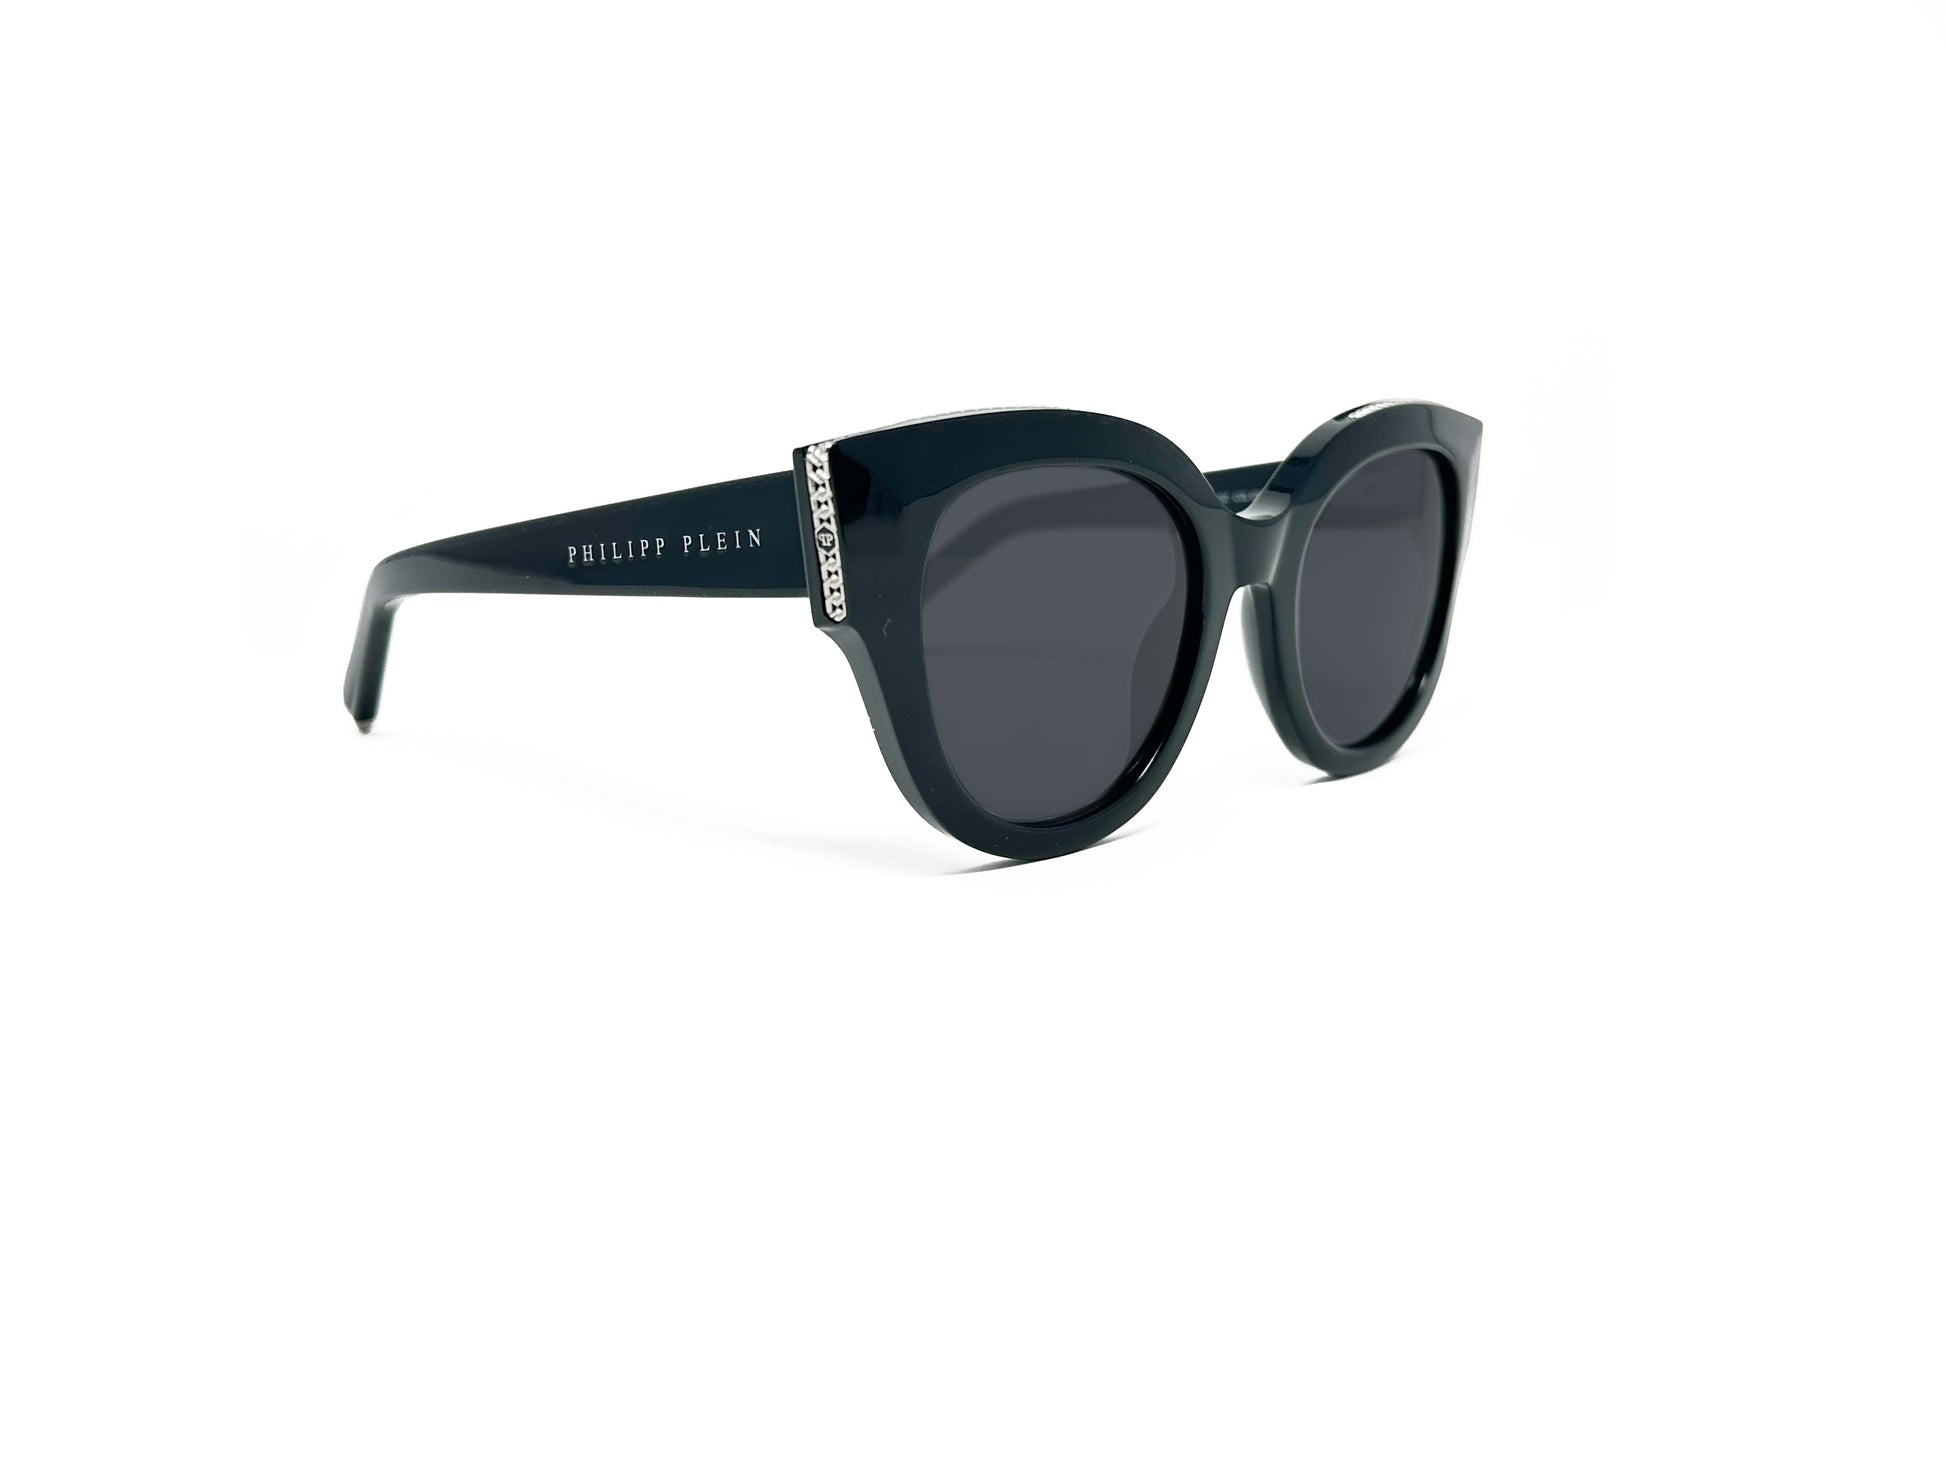 Philipp Plein rounded sunglasses with slight cat-eye. Model: SPP026S Nobile Milan. Color: 0700 - Black with Silver metal accents. Side view.